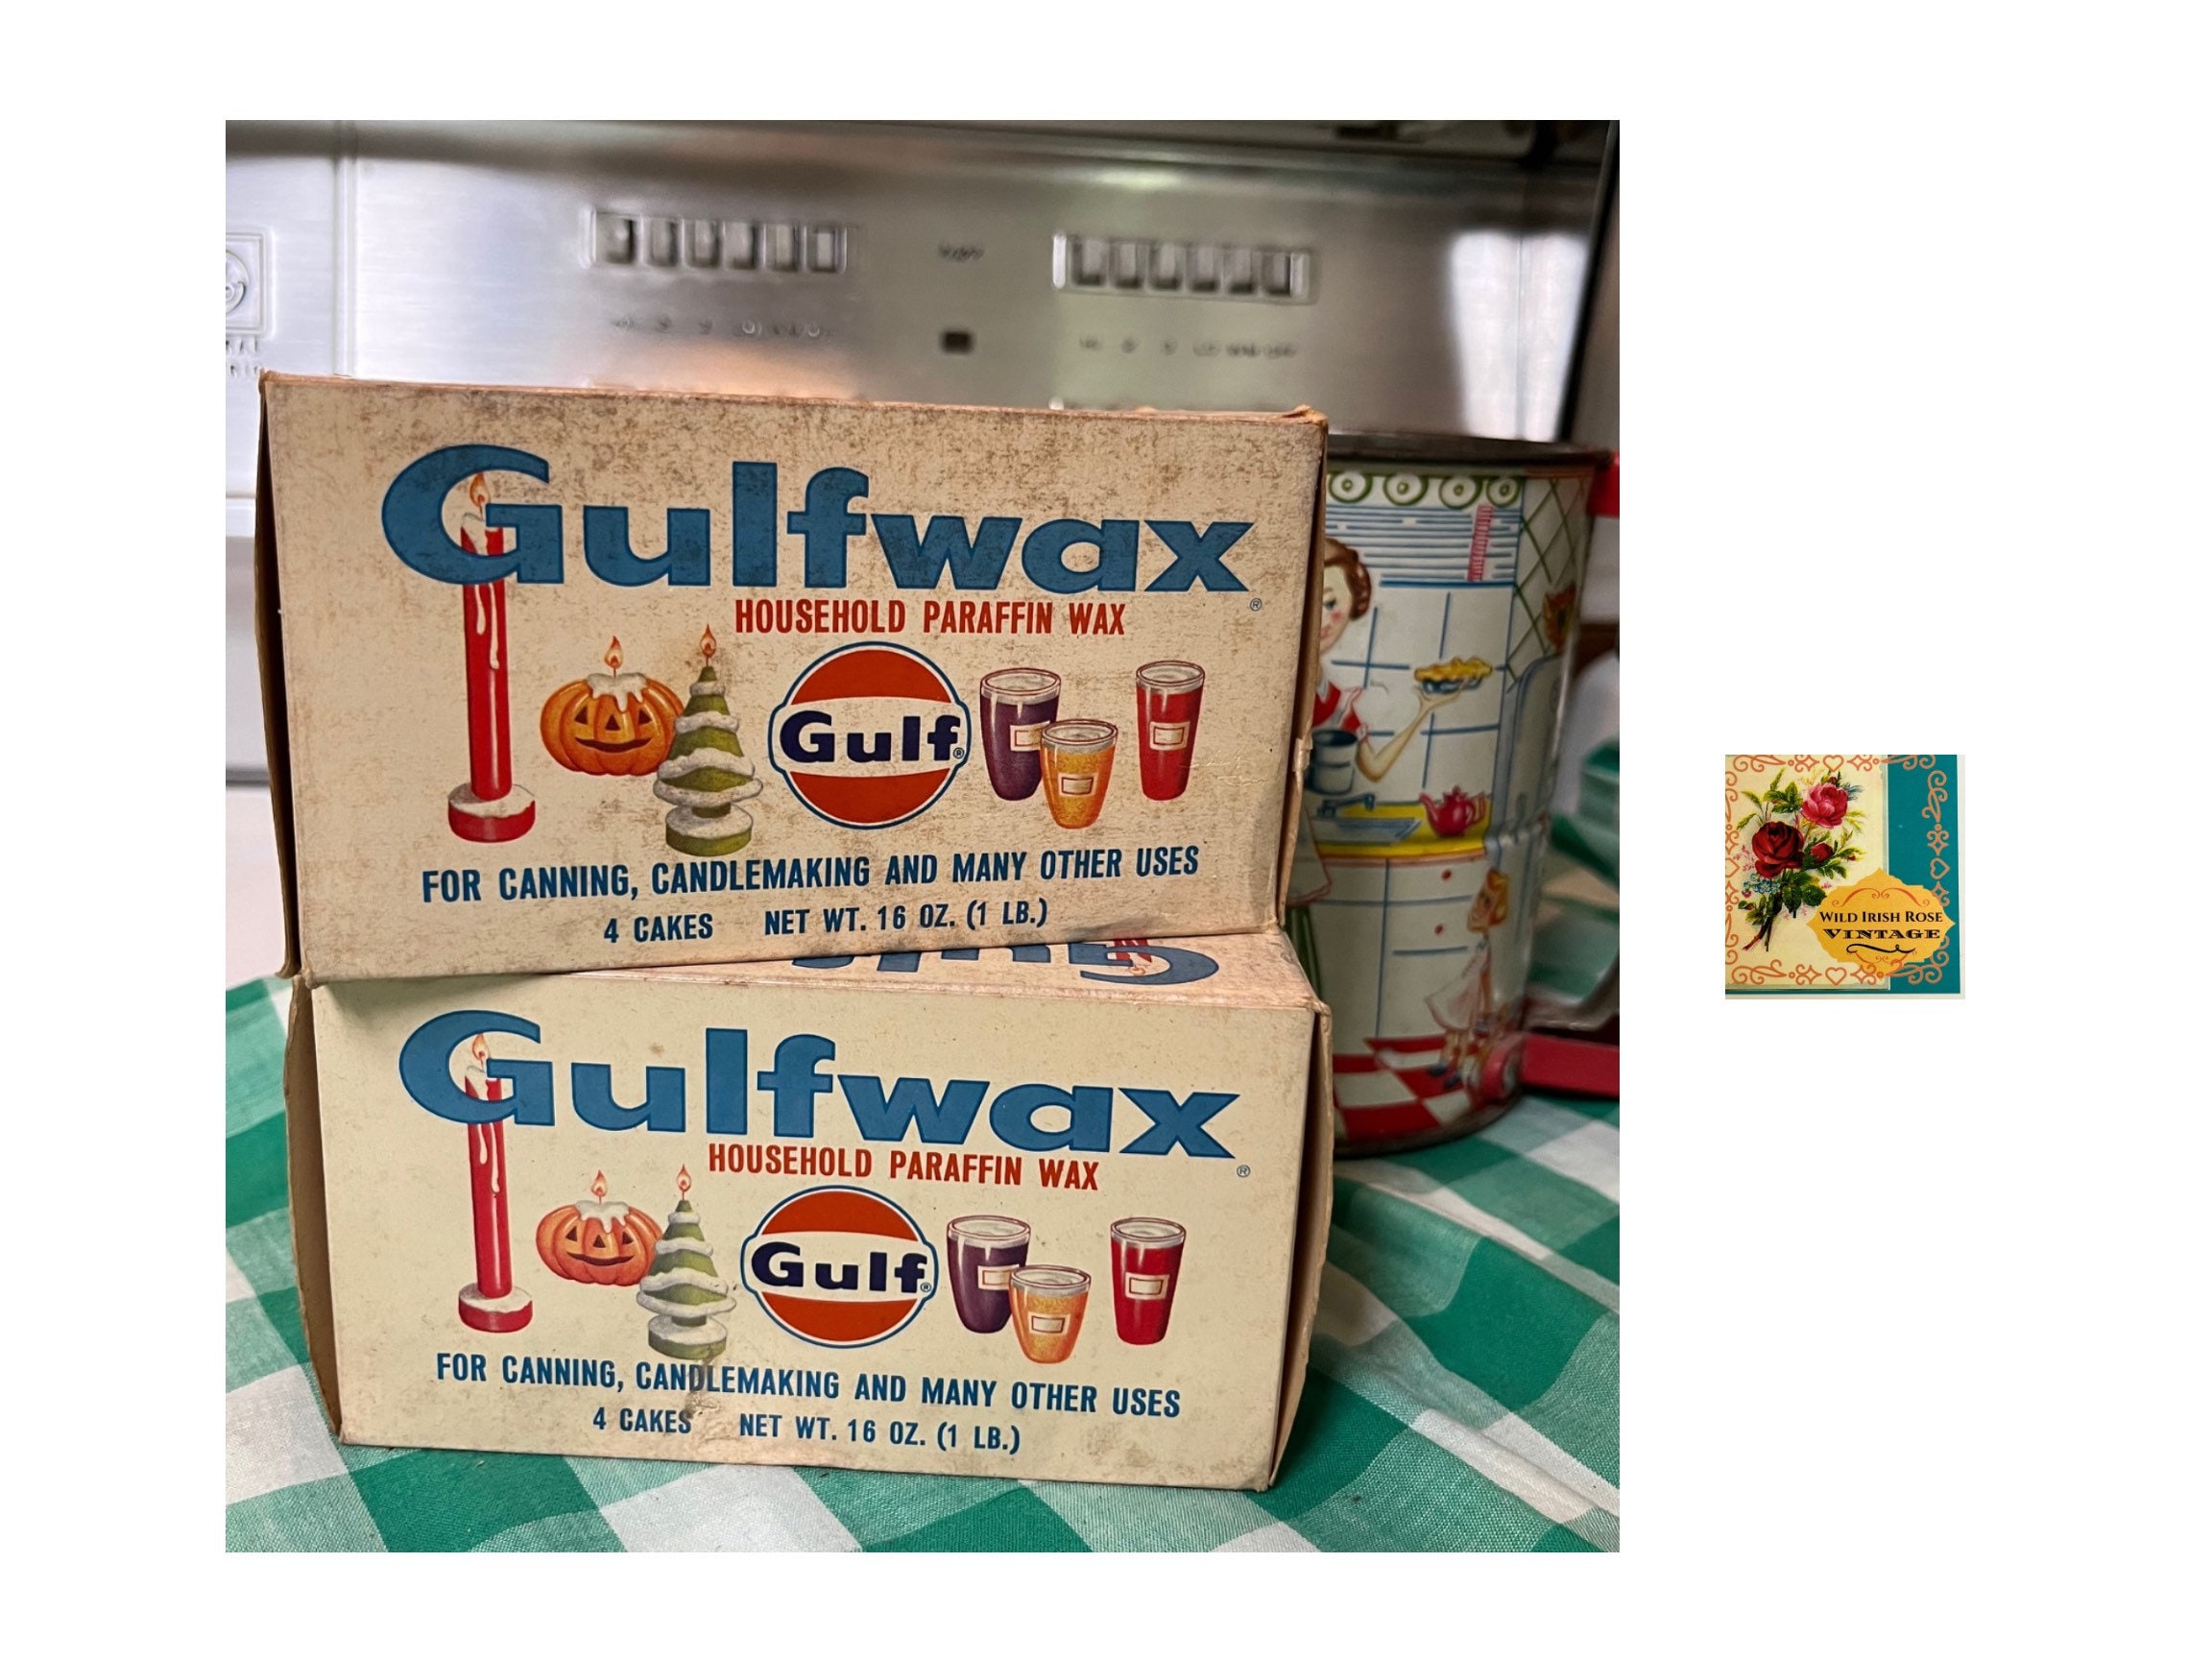 NEW Gulfwax Household Parafin Lot of 2 16oz Boxes *FREE SHIPPING*